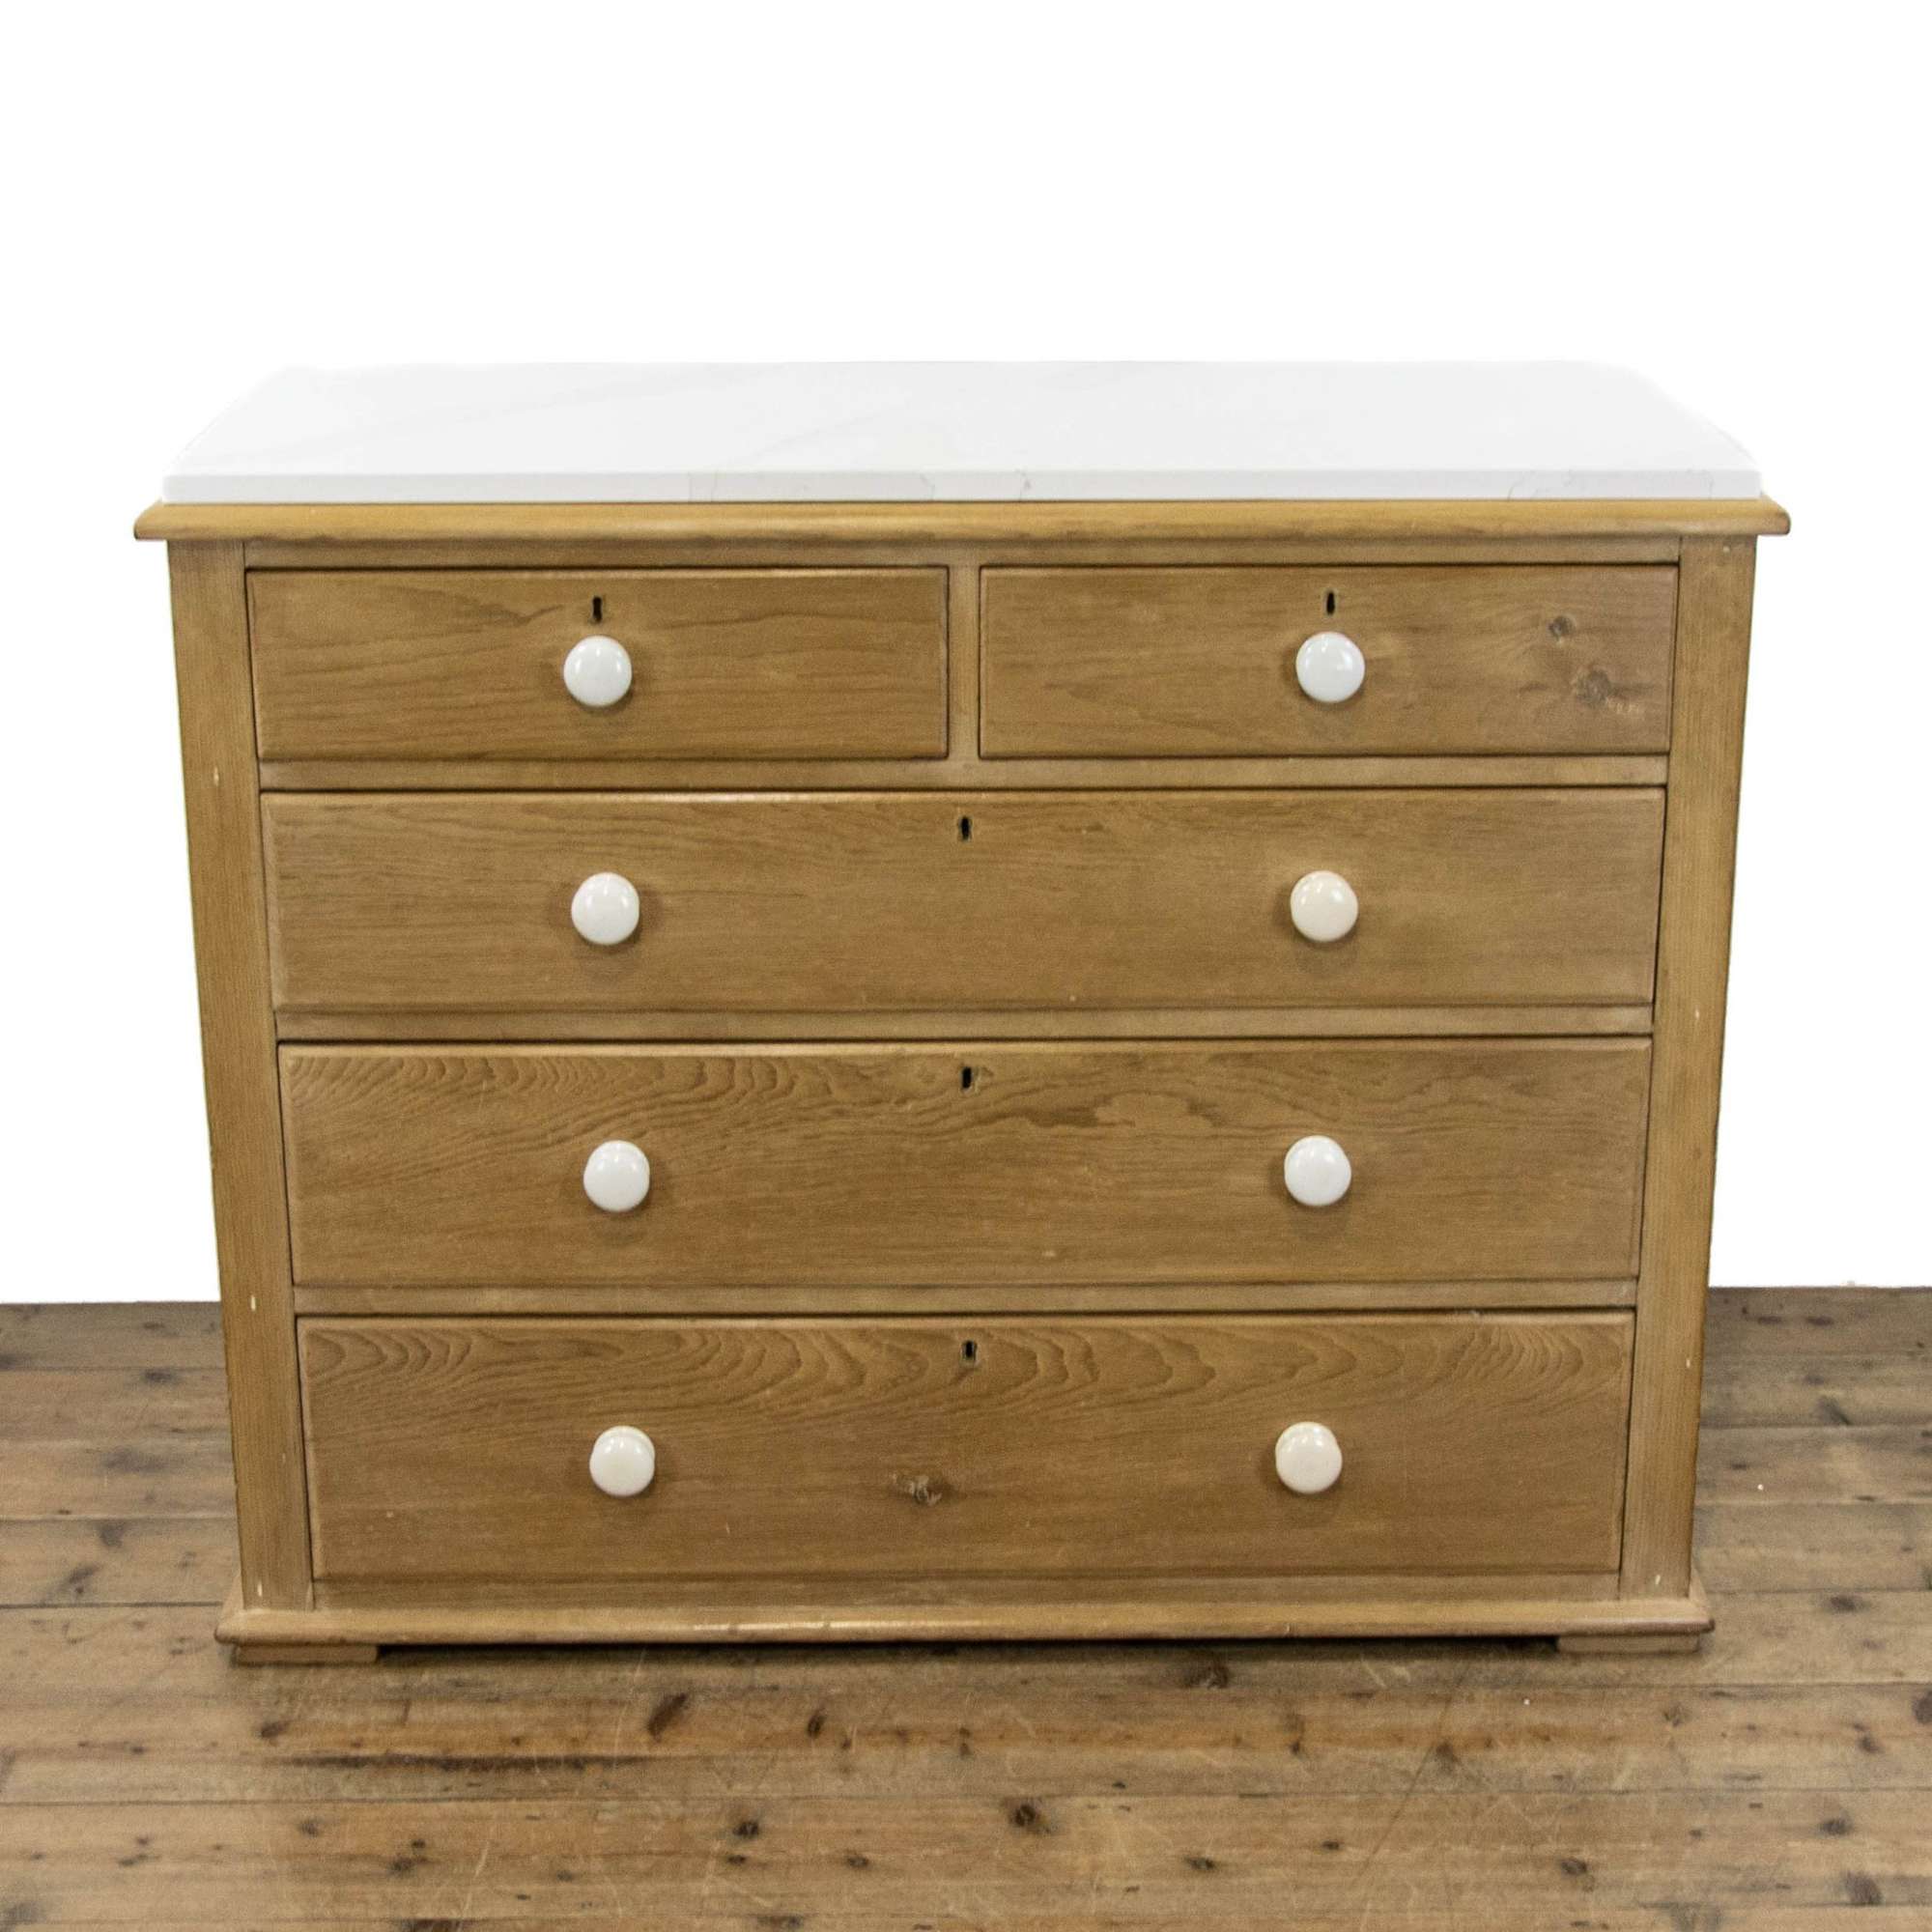 Victorian Pine Chest Of Drawers With Marble Top